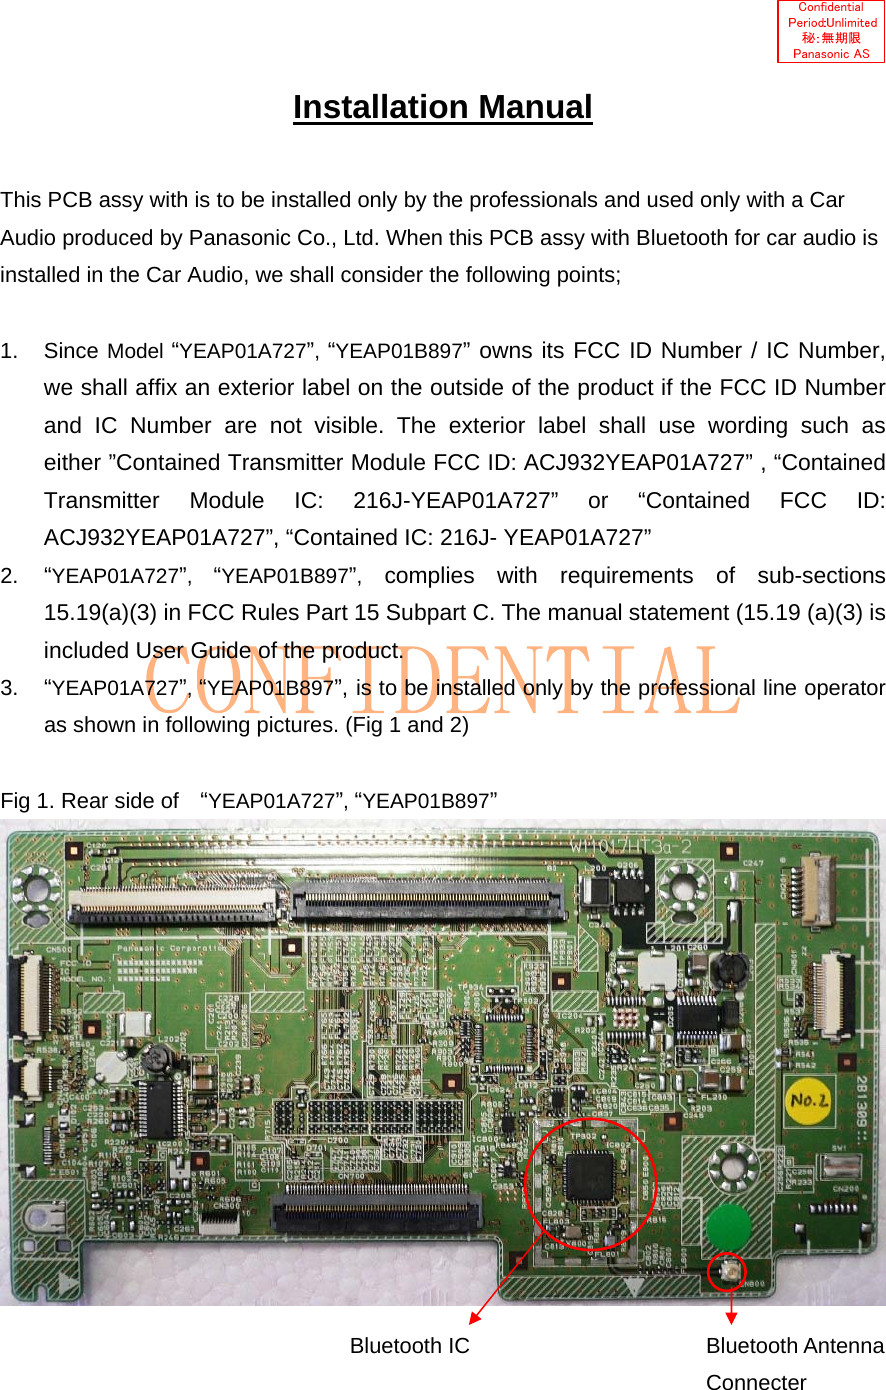   Installation Manual  This PCB assy with is to be installed only by the professionals and used only with a Car Audio produced by Panasonic Co., Ltd. When this PCB assy with Bluetooth for car audio is installed in the Car Audio, we shall consider the following points;  1. Since Model “YEAP01A727”, “YEAP01B897” owns its FCC ID Number / IC Number, we shall affix an exterior label on the outside of the product if the FCC ID Number and IC Number are not visible. The exterior label shall use wording such as either ”Contained Transmitter Module FCC ID: ACJ932YEAP01A727” , “Contained Transmitter Module IC: 216J-YEAP01A727” or “Contained FCC ID: ACJ932YEAP01A727”, “Contained IC: 216J- YEAP01A727” 2.  “YEAP01A727”,  “YEAP01B897”, complies with requirements of sub-sections 15.19(a)(3) in FCC Rules Part 15 Subpart C. The manual statement (15.19 (a)(3) is included User Guide of the product. 3.  “YEAP01A727”, “YEAP01B897”, is to be installed only by the professional line operator as shown in following pictures. (Fig 1 and 2)  Fig 1. Rear side of   “YEAP01A727”, “YEAP01B897”   Bluetooth IC  Bluetooth Antenna Connecter 